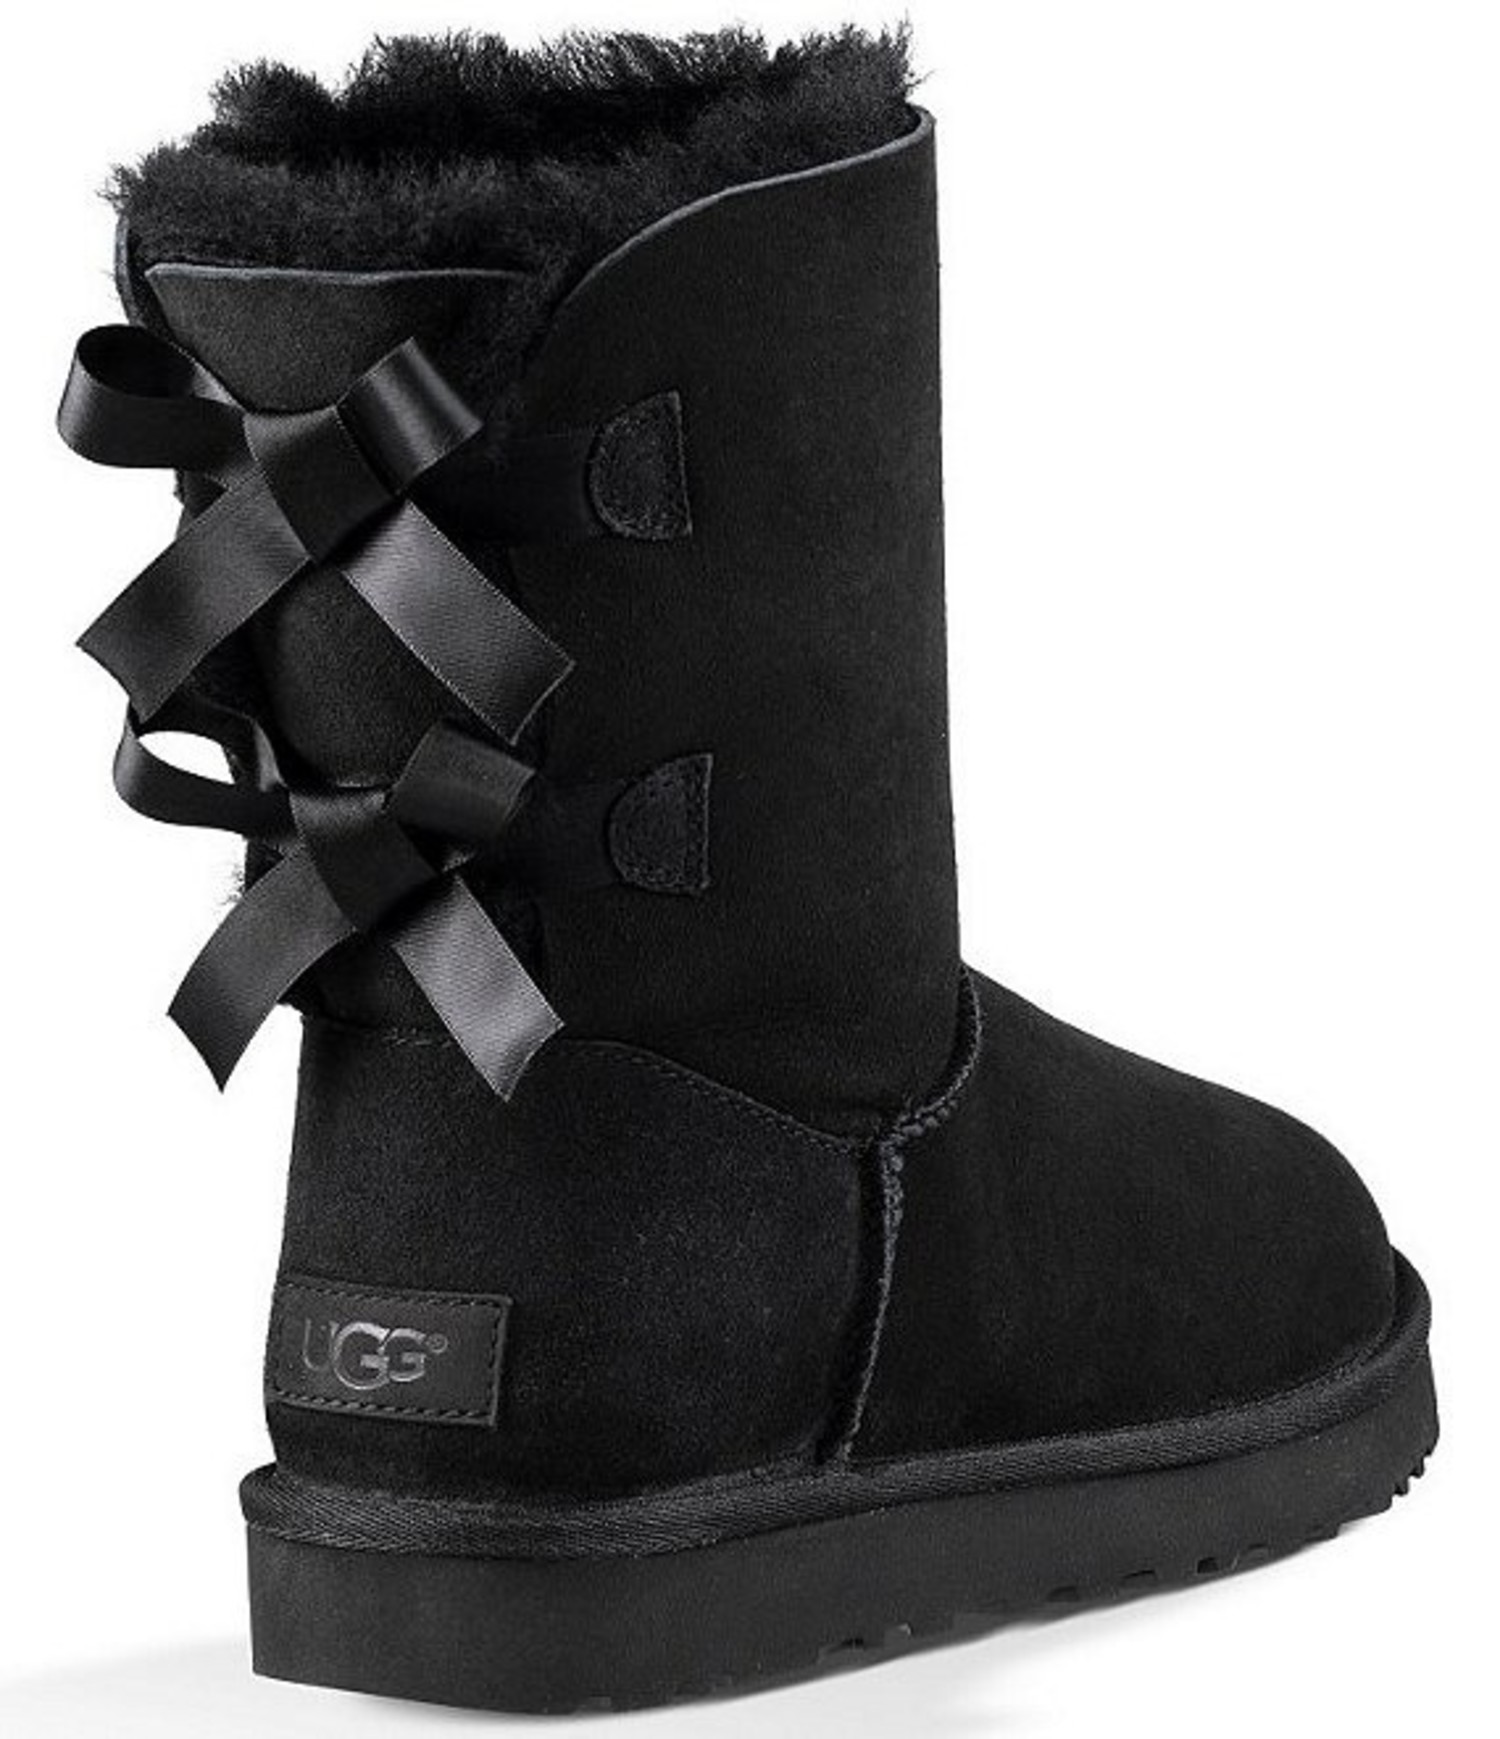 UGG Women's Bailey Bow II Black Boot - Continental Shoes